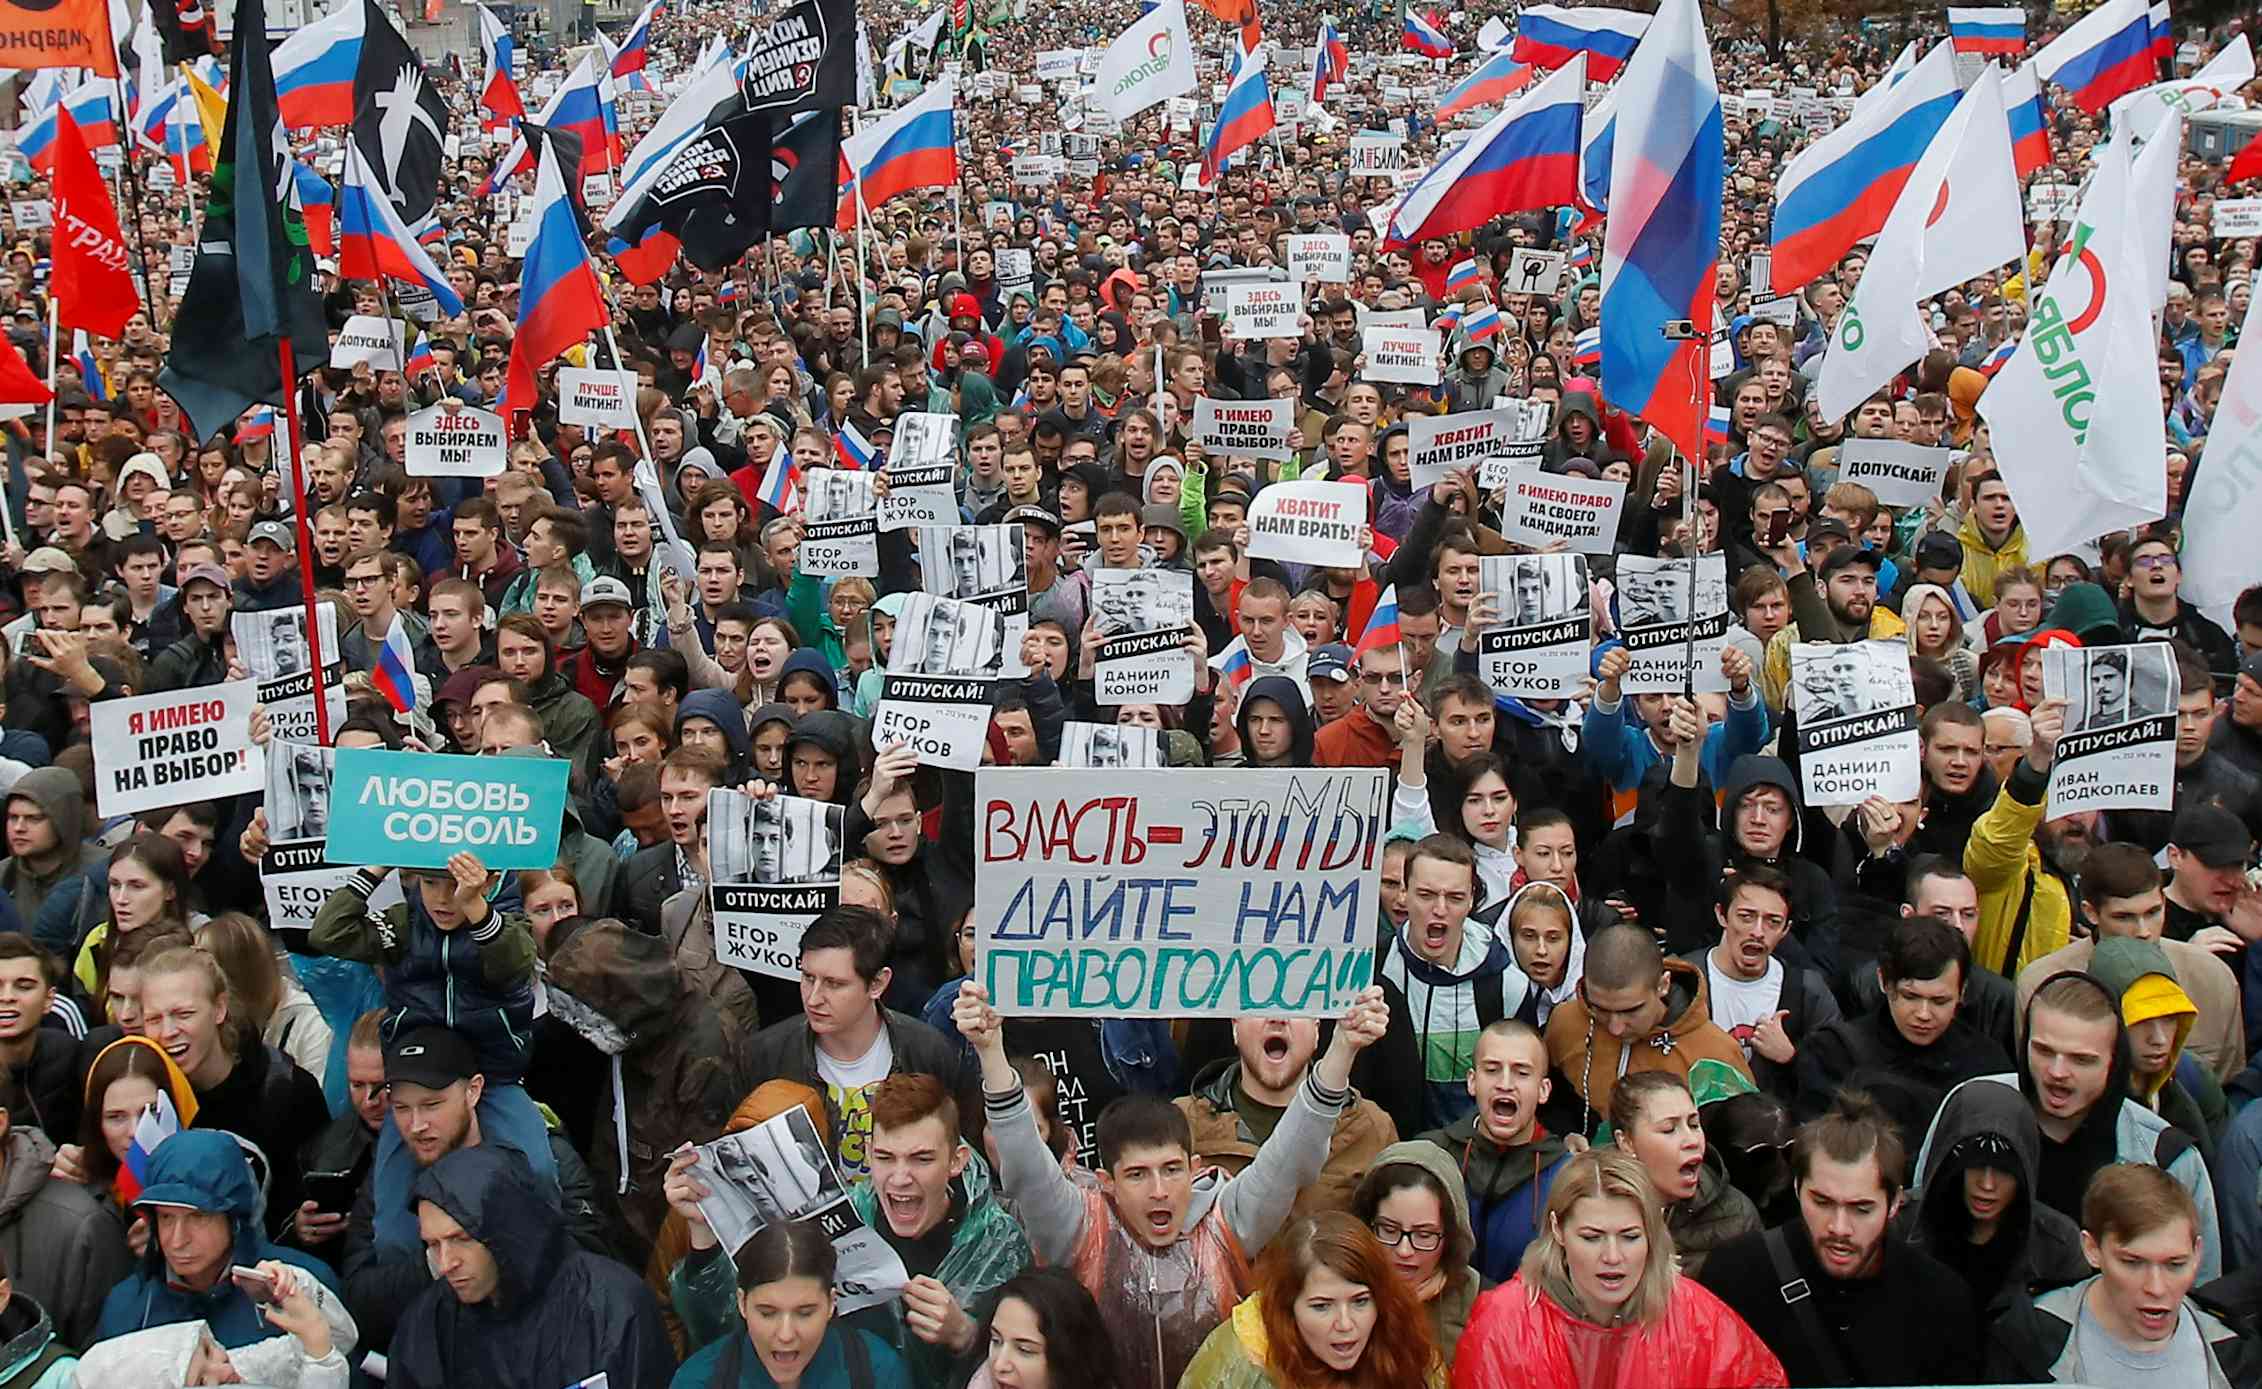 Russian protests highlight how authorities crackdown on activists by